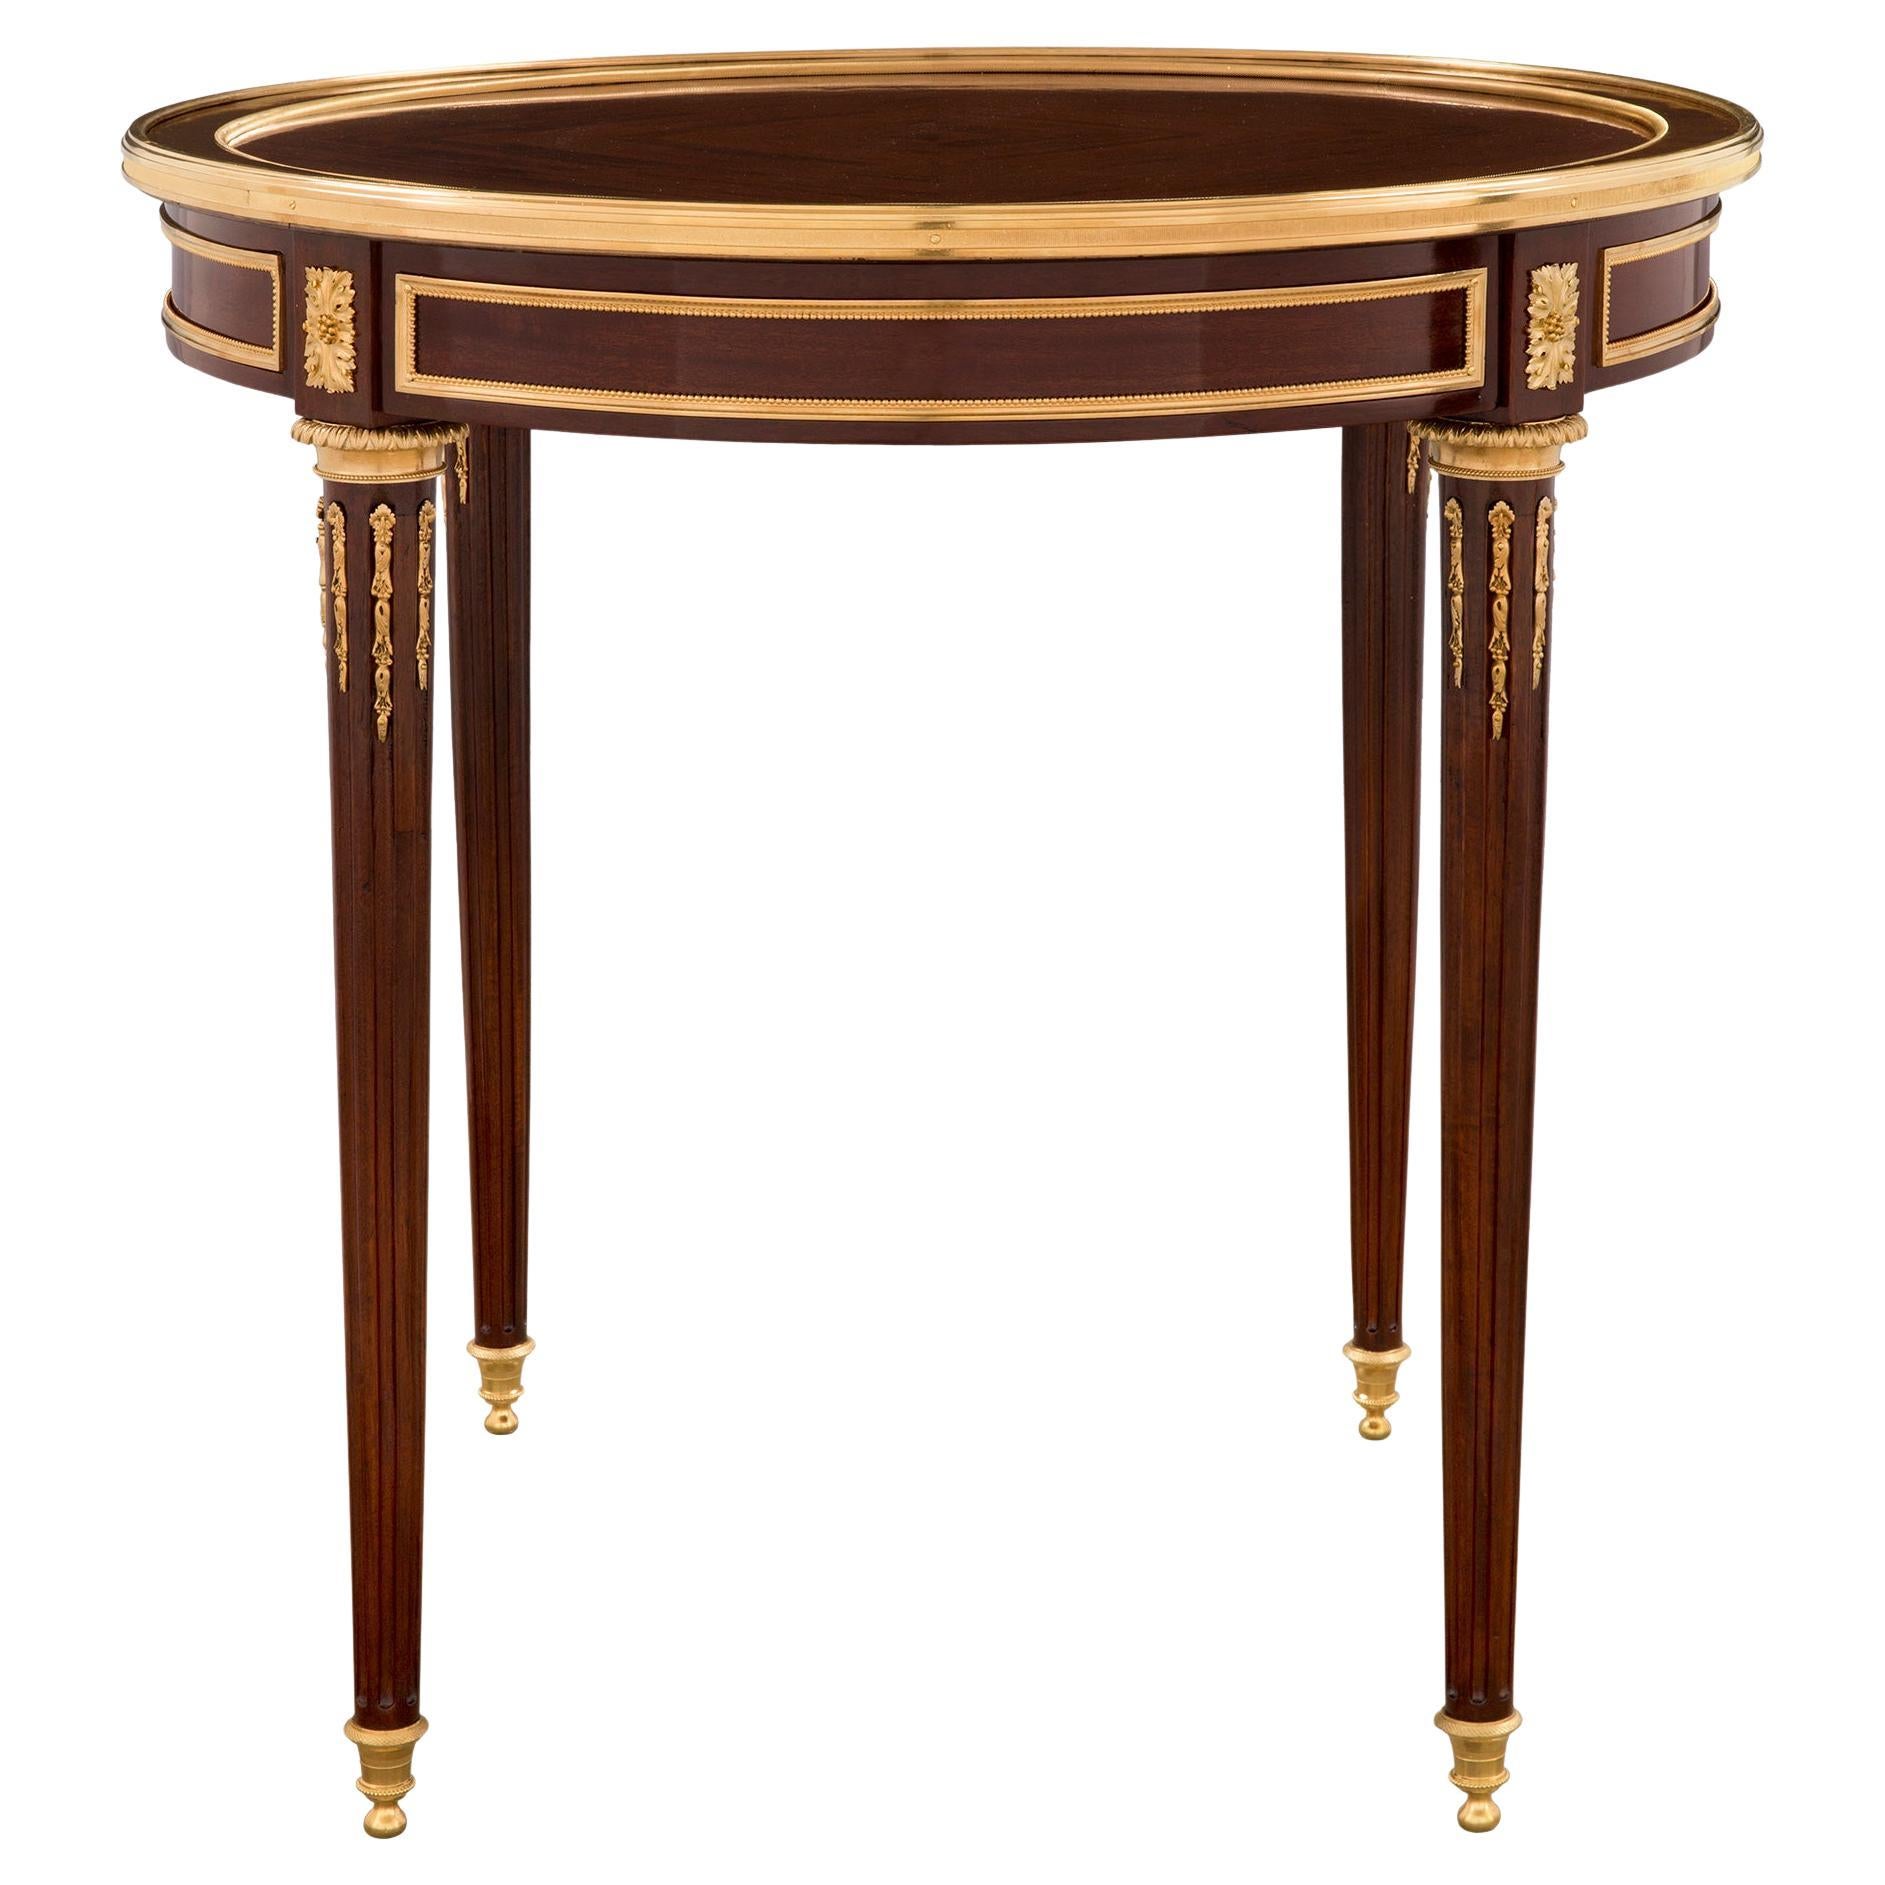 French 19th Century Louis XVI Style Mahogany Side Table, Attributed to Dasson